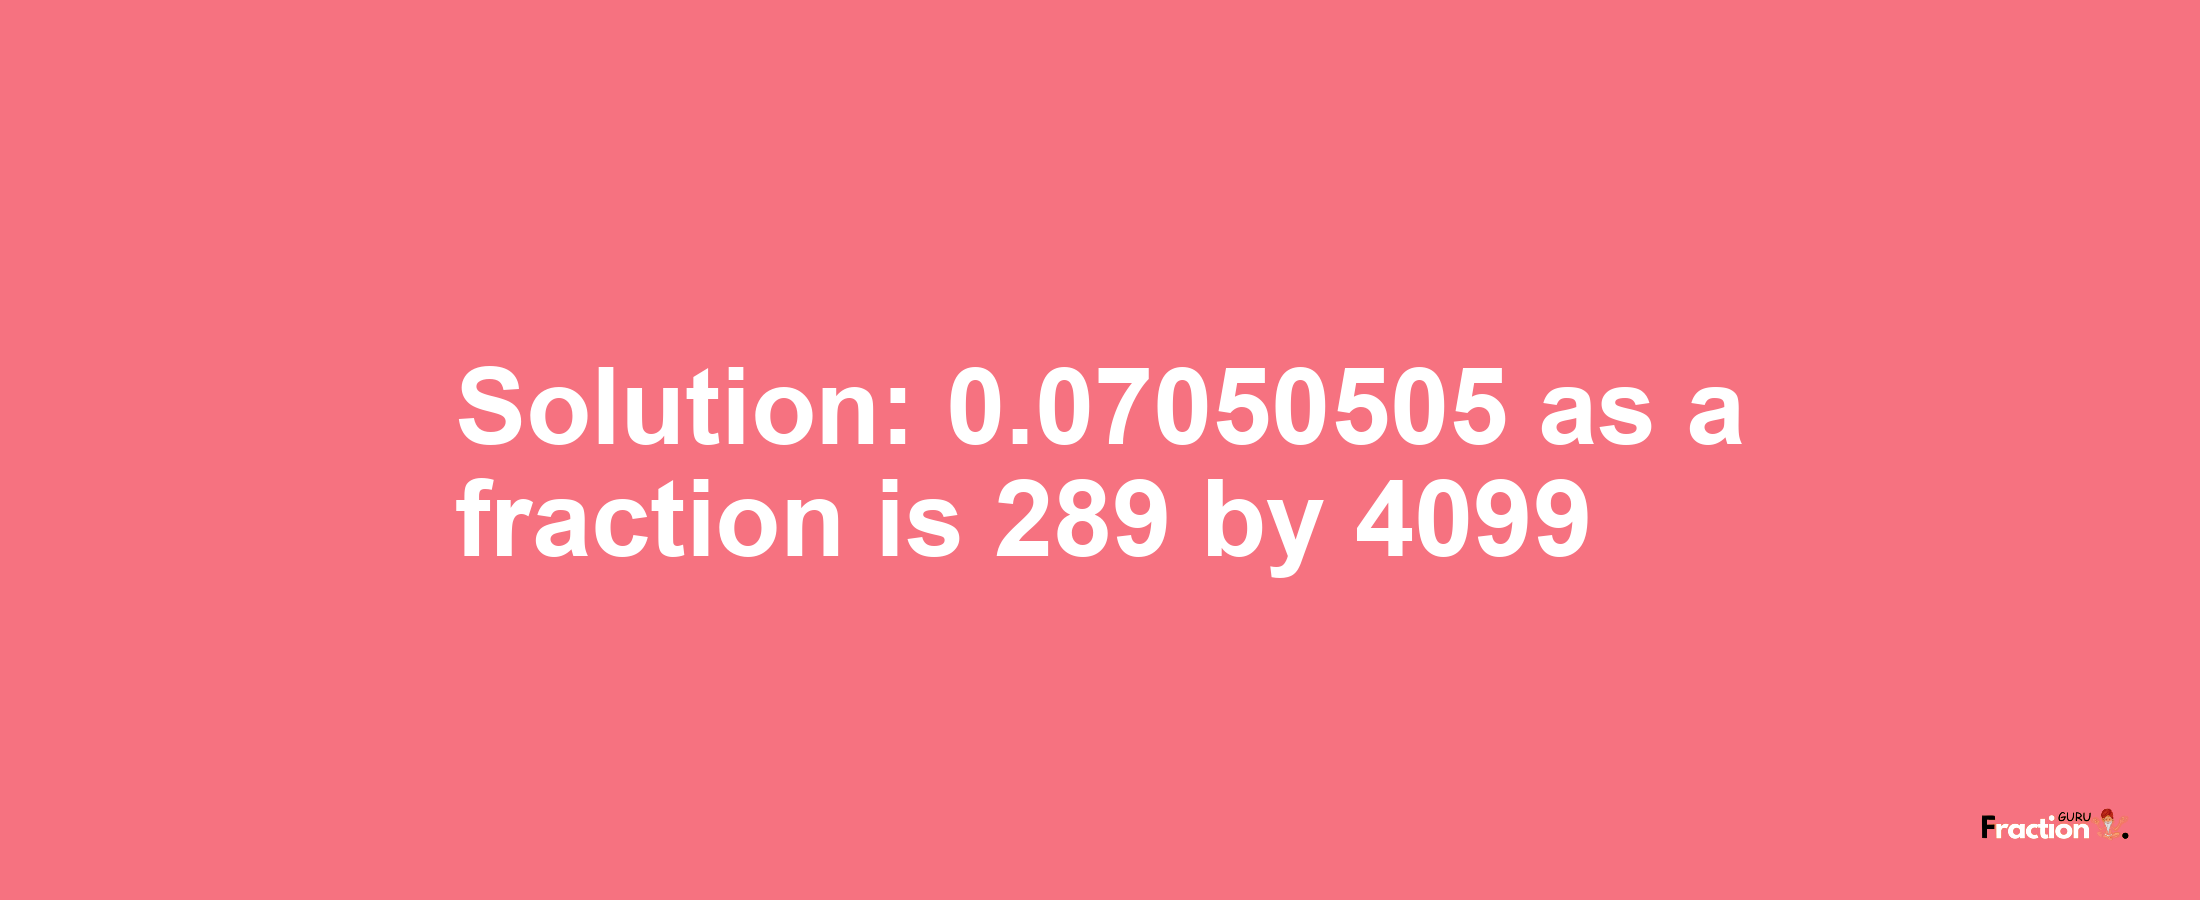 Solution:0.07050505 as a fraction is 289/4099